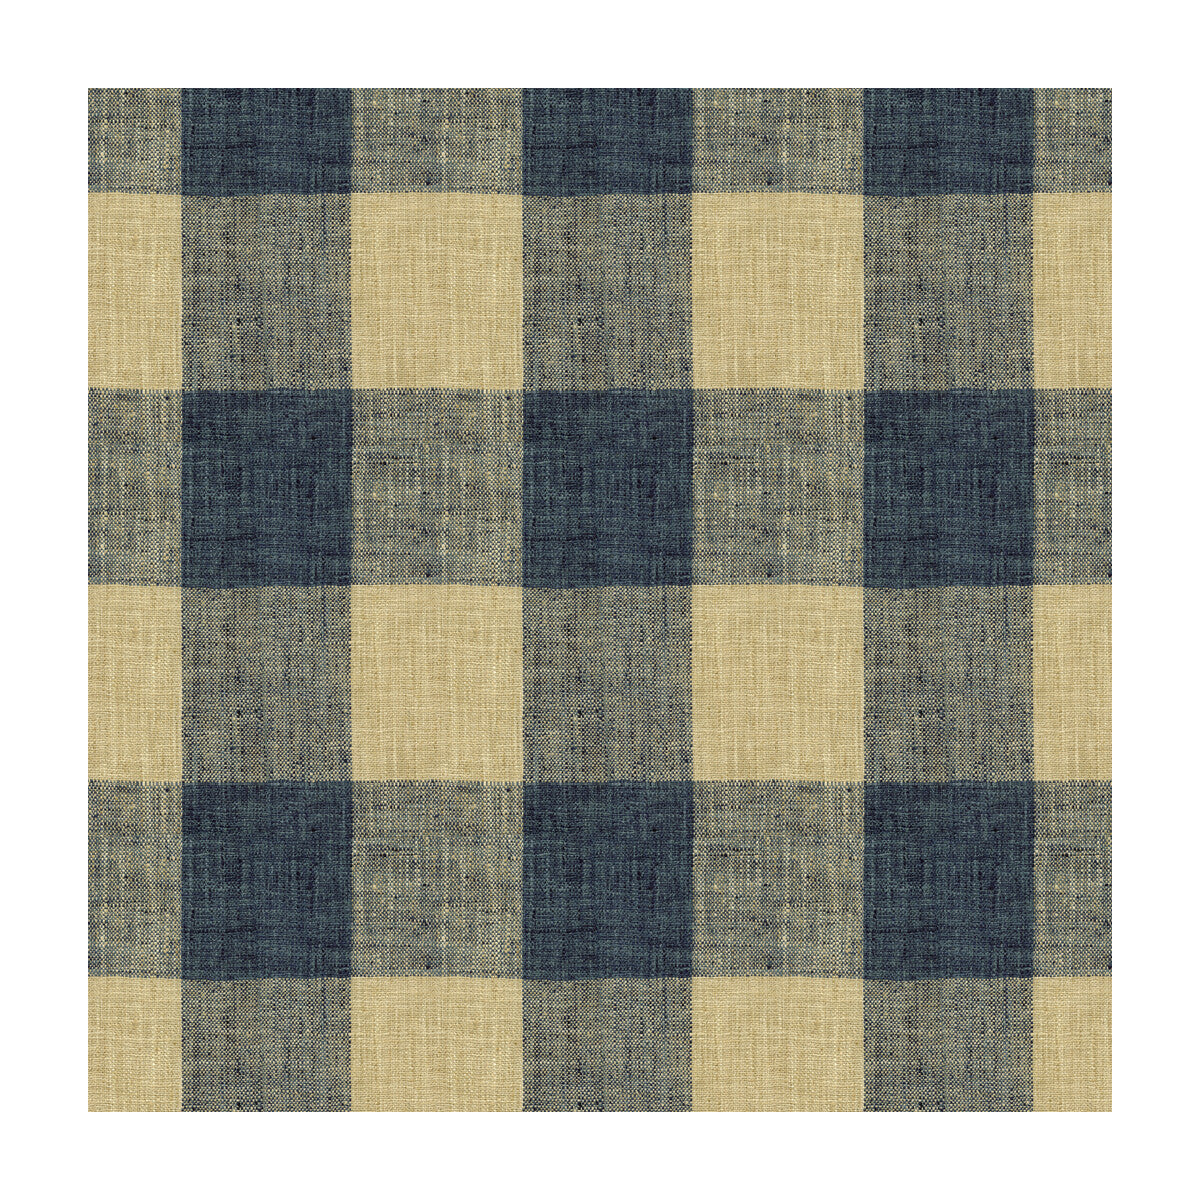 Kravet Basics fabric in 34090-516 color - pattern 34090.516.0 - by Kravet Basics in the Bungalow Chic II collection